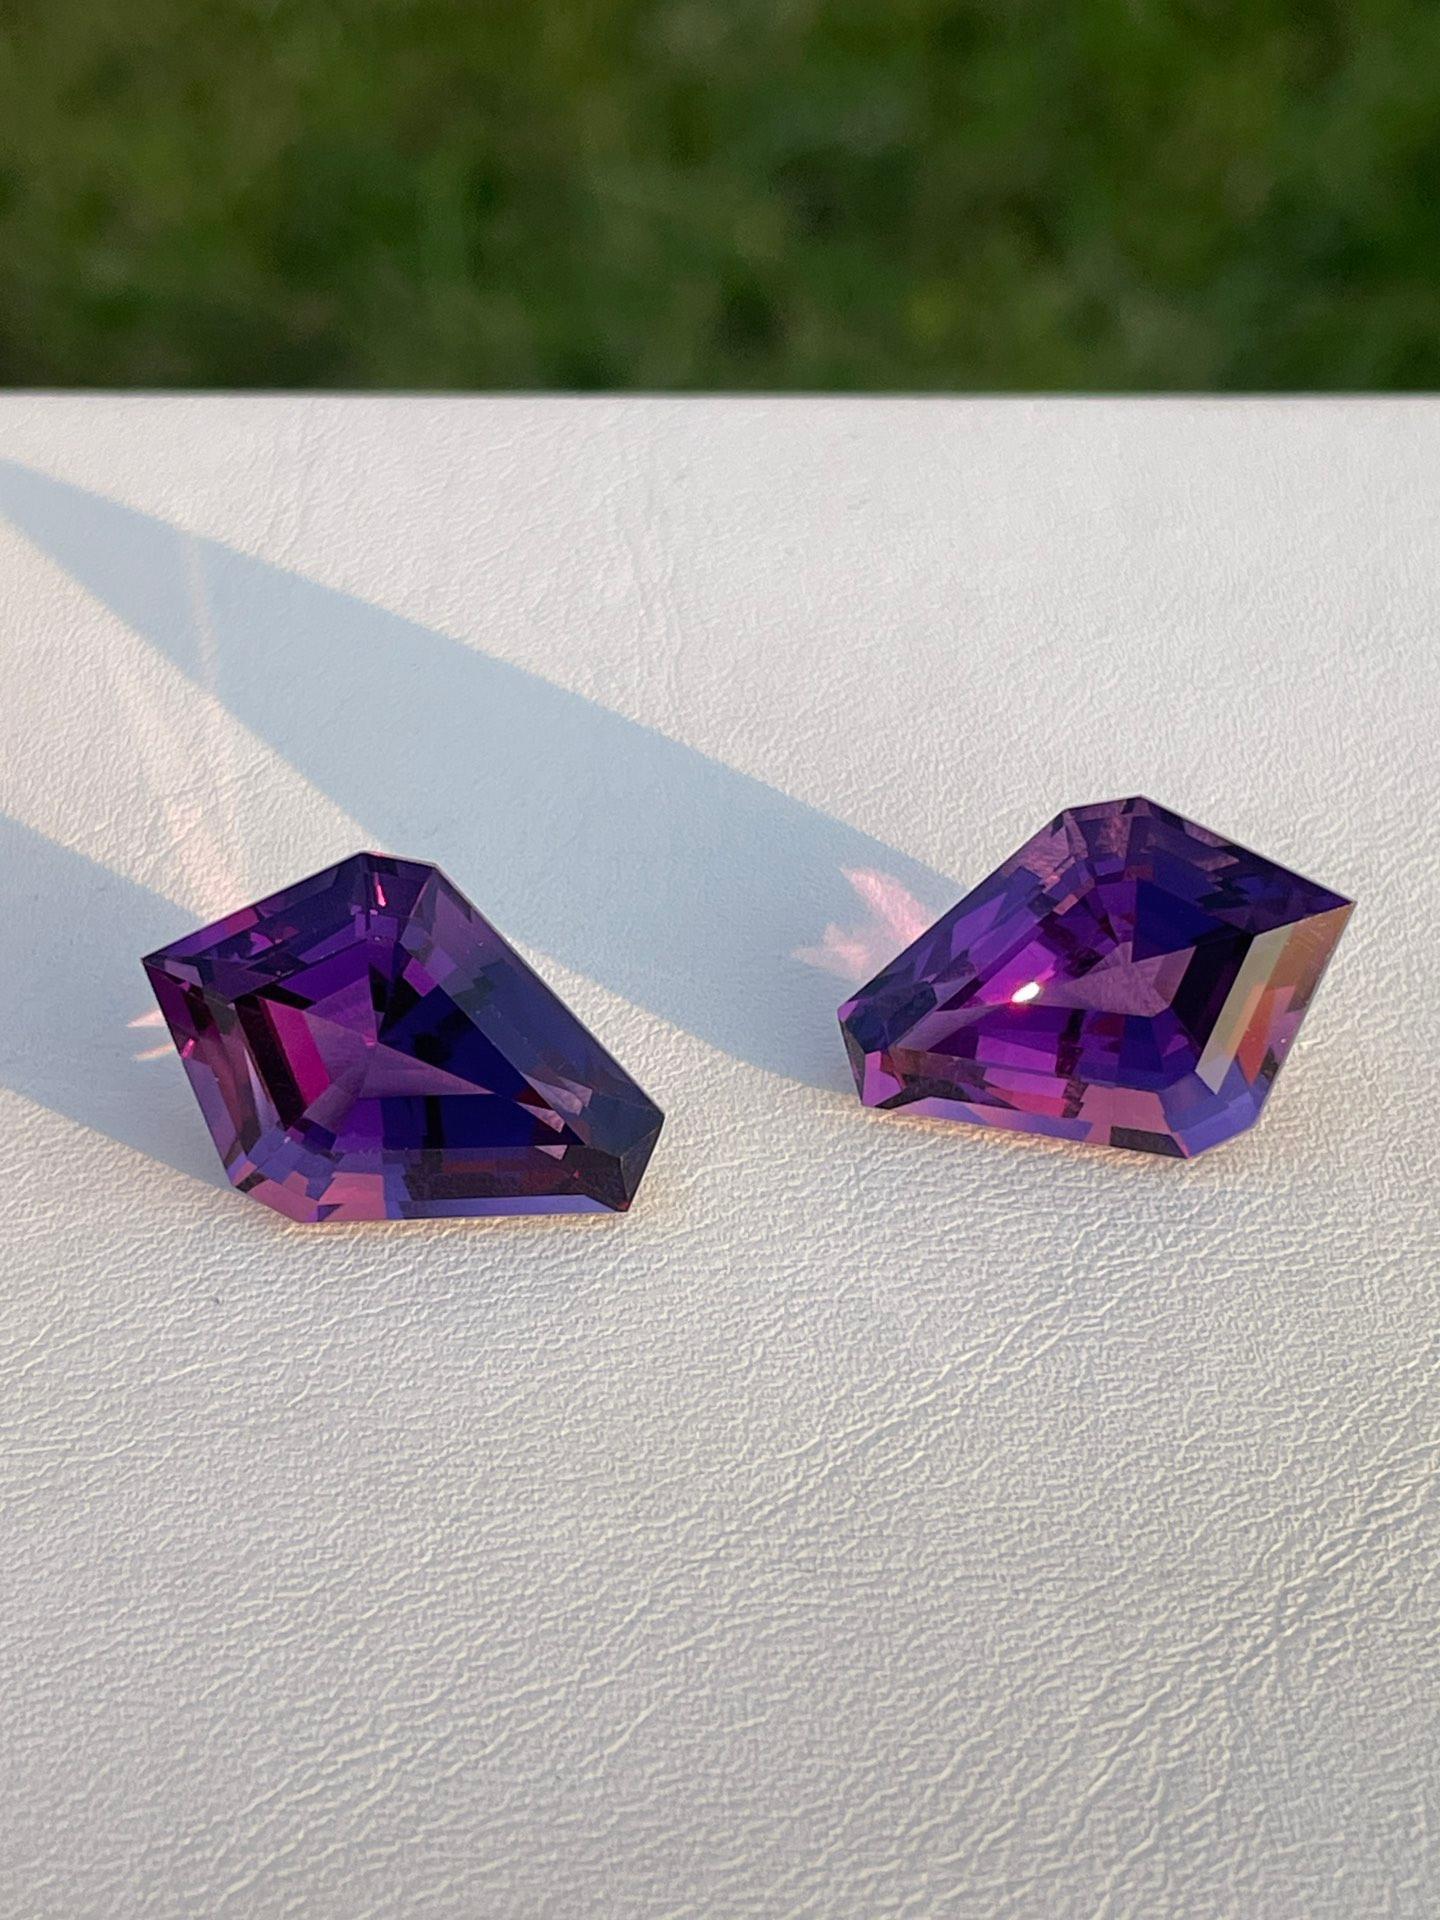 31.61ct Natural pair Amethyst Beauty new cut design for luxury jewelry 

Name: natural amethyst 
weight: 31.61ct
size: 20*16mm
origin: Brazil 
color: purple 
clarity: loop clean 100%
Cut: WB GEM signature cut 

Precision cut and include design that